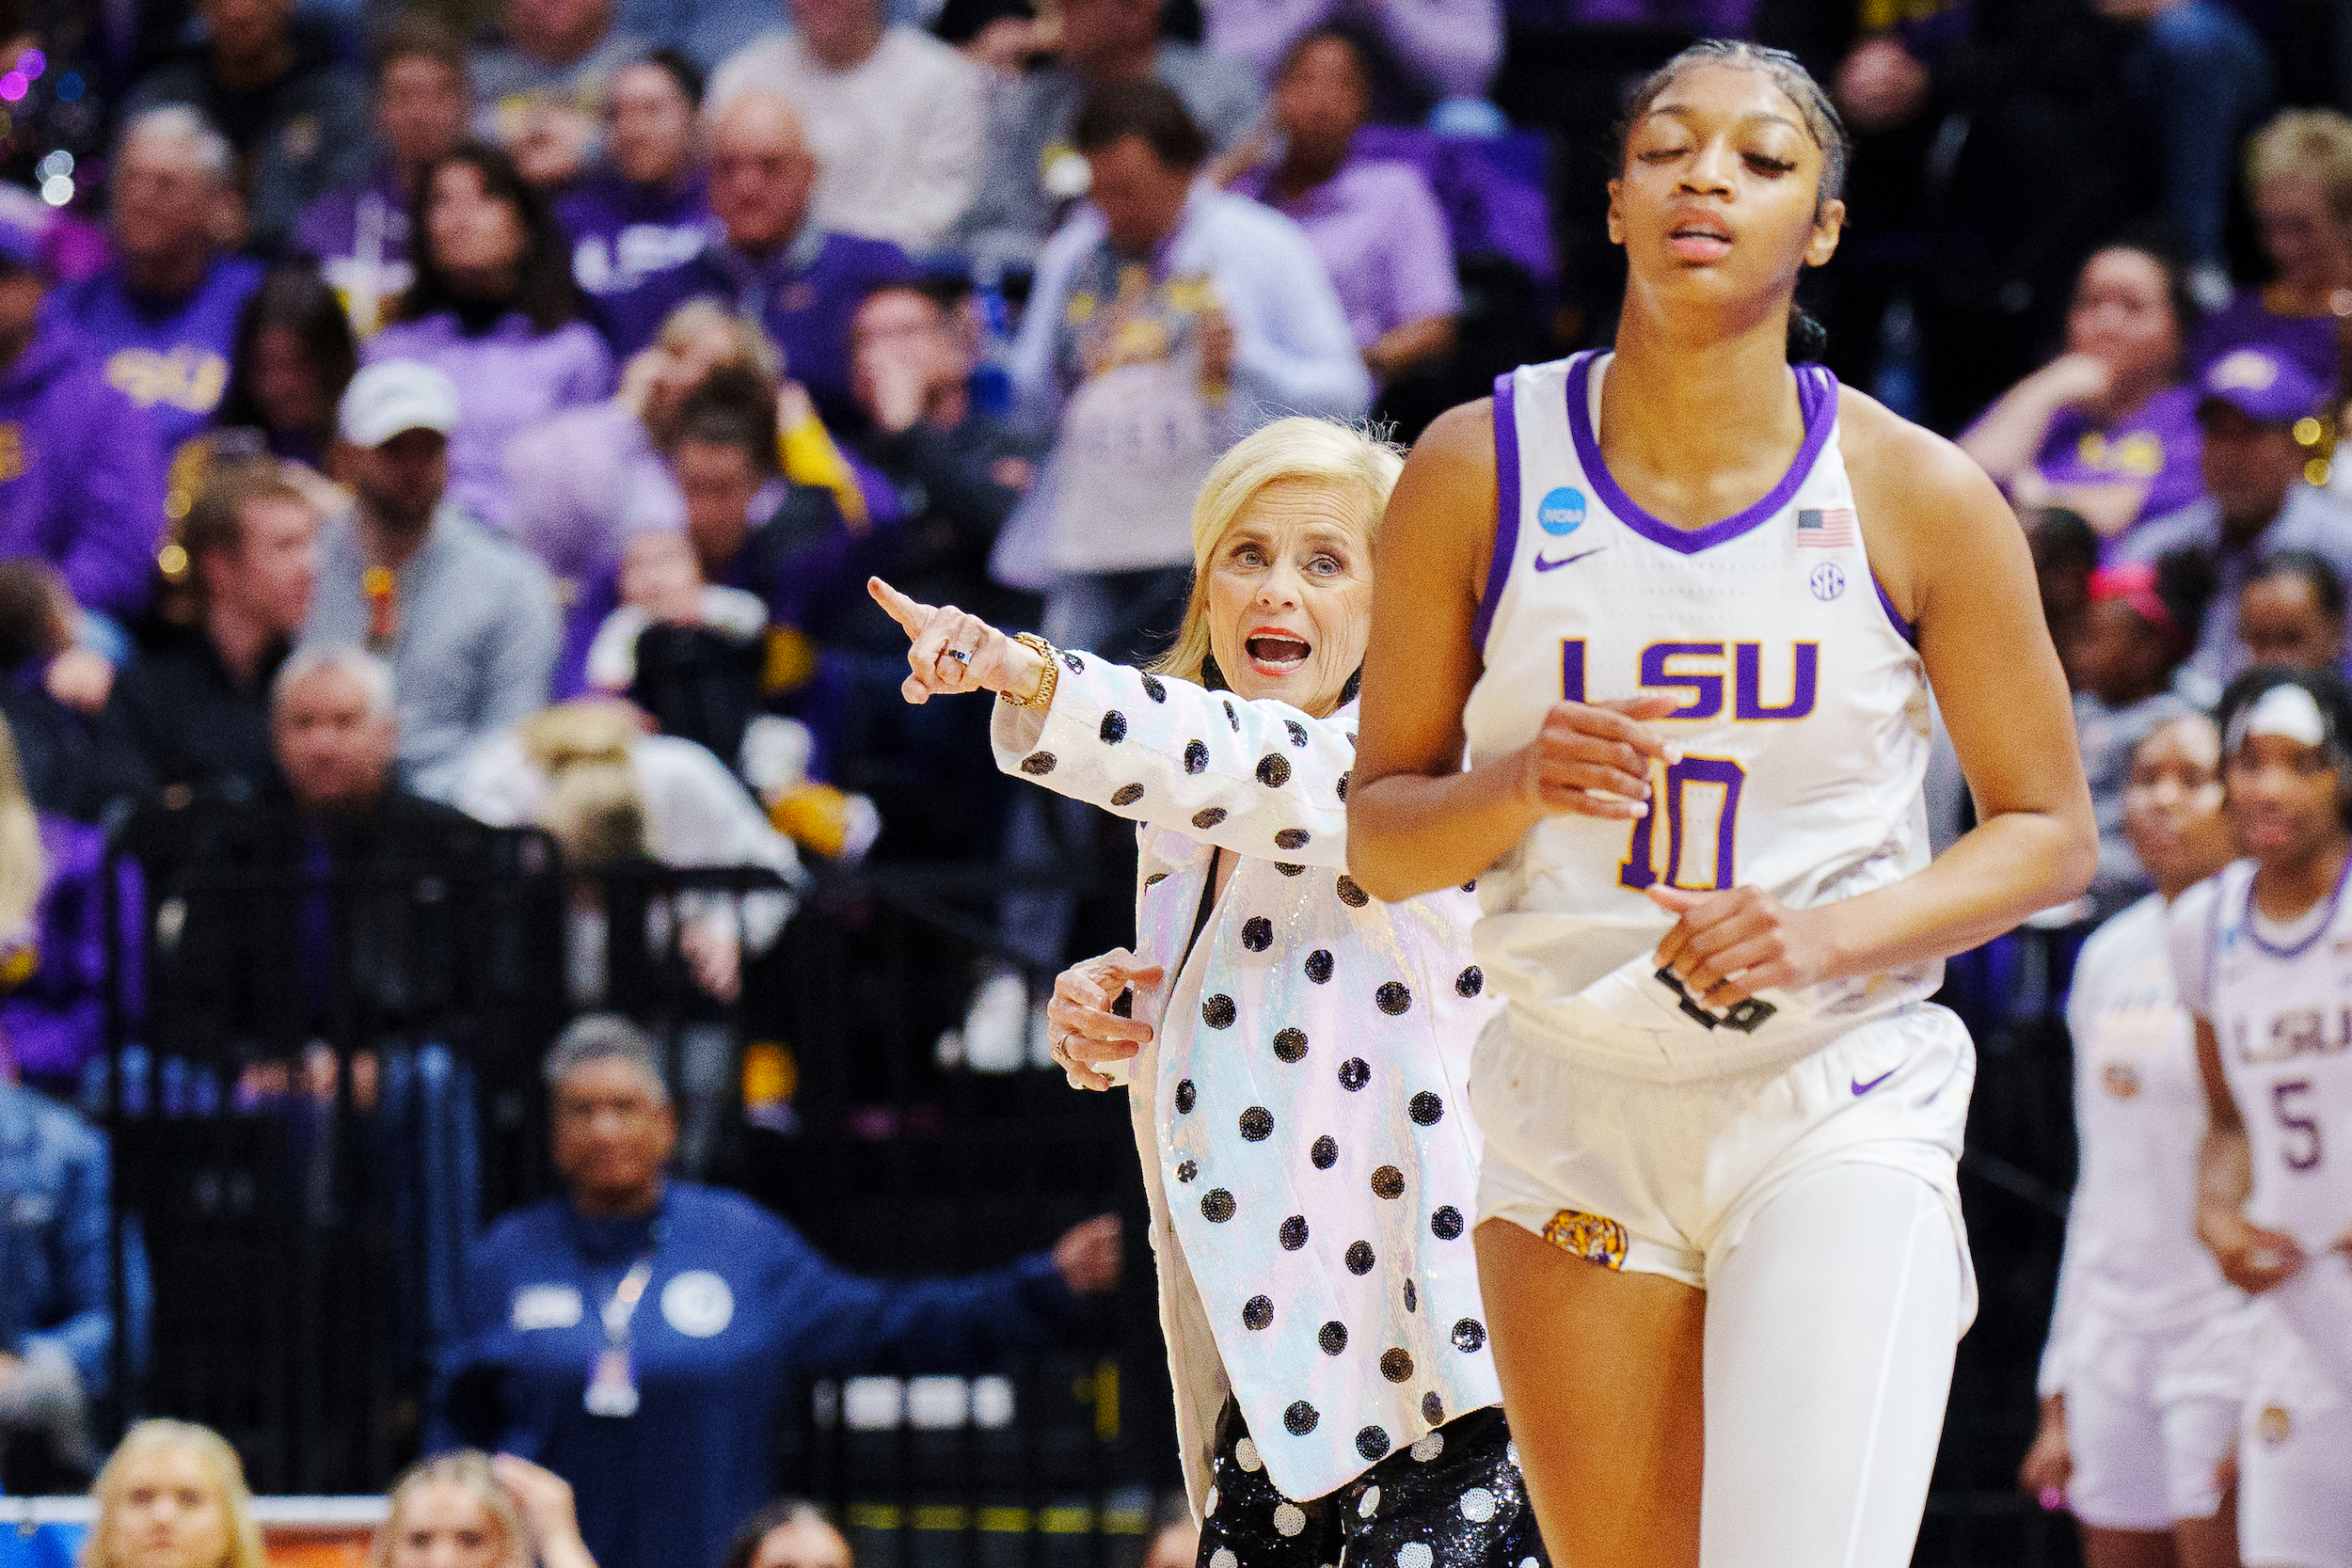 Head coach Kim Mulkey of the LSU Lady Tigers yells at Angel Reese #10 during the second quarter against the Michigan Wolverines in the second round of the 2023 NCAA Women's Basketball Tournament held at the Pete Maravich Assembly Center on March 19, 2023 in Baton Rouge, Louisiana.